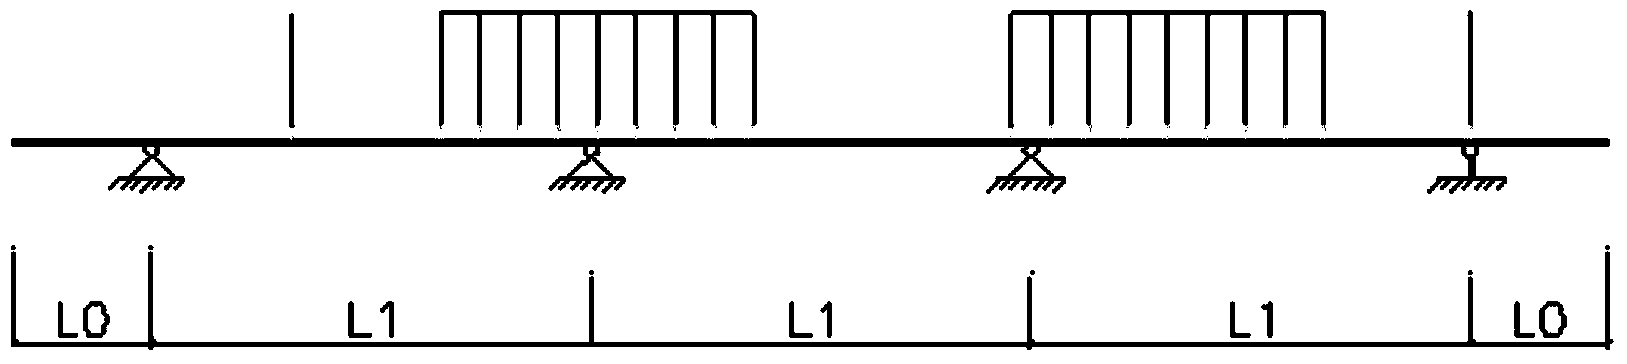 Calculation method for piled raft infrastructure